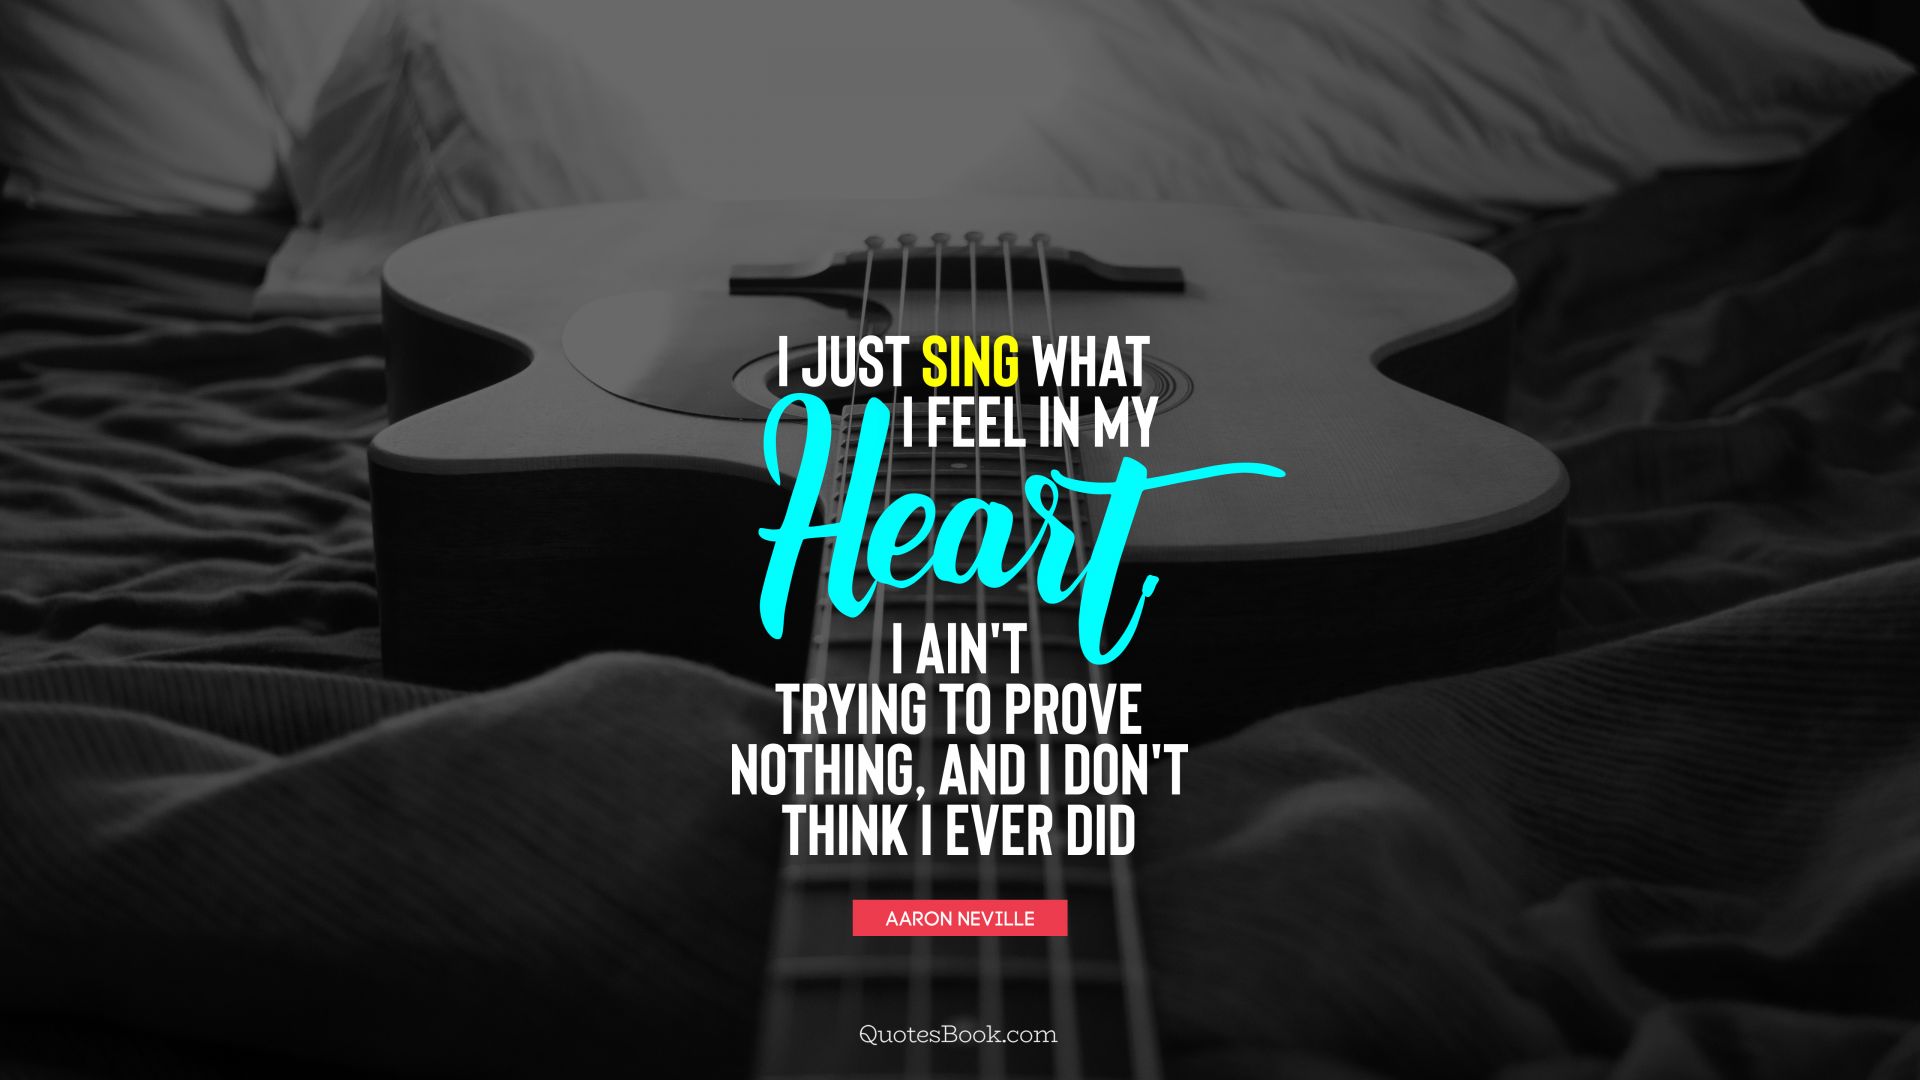 I just sing what I feel in my heart. I ain't trying to prove nothing, and I don't think I ever did. - Quote by Aaron Neville